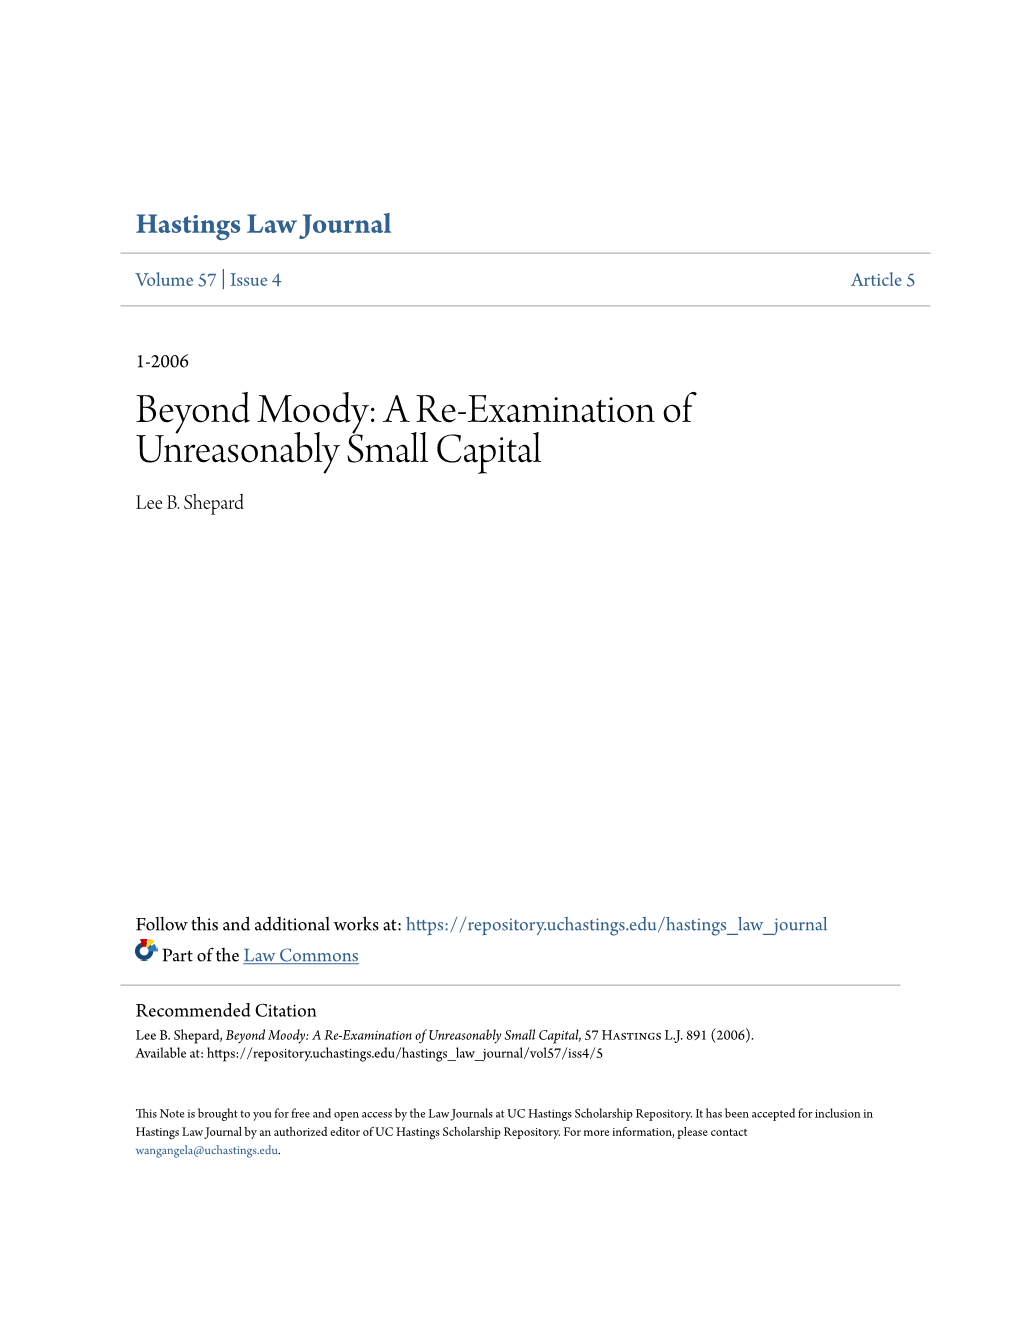 Beyond Moody: a Re-Examination of Unreasonably Small Capital Lee B